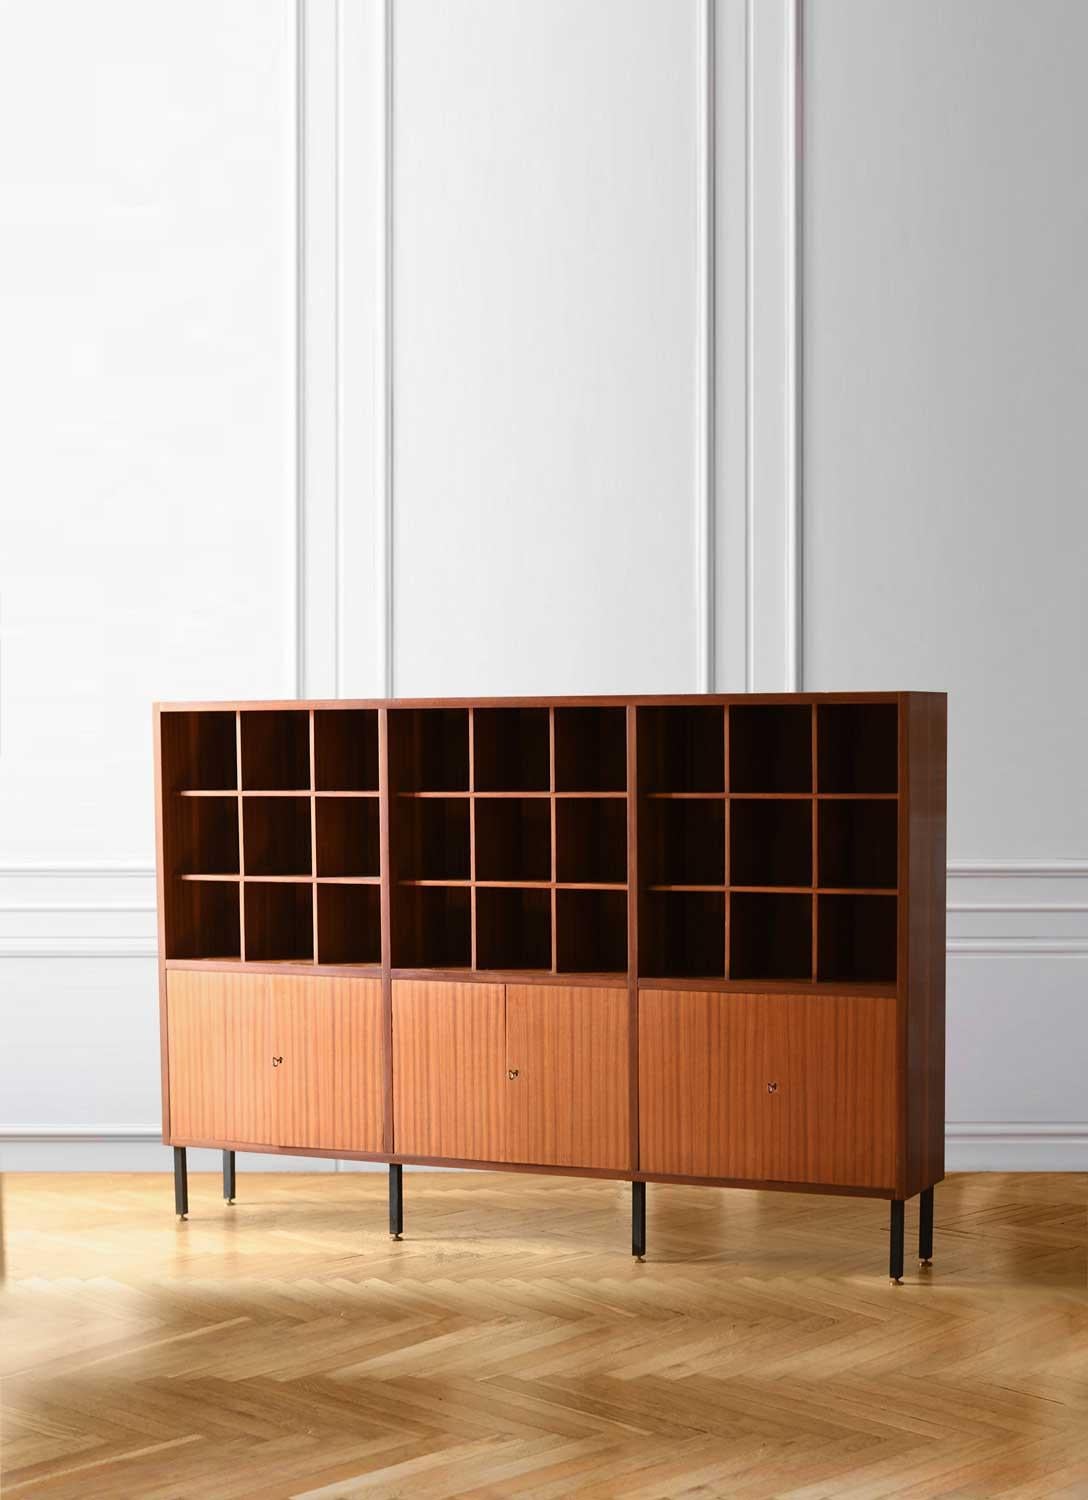 Wooden sideboard with modular shelves and doors, Italy 1960.
Dimensions: 200 W x 134 H x 29 D cm